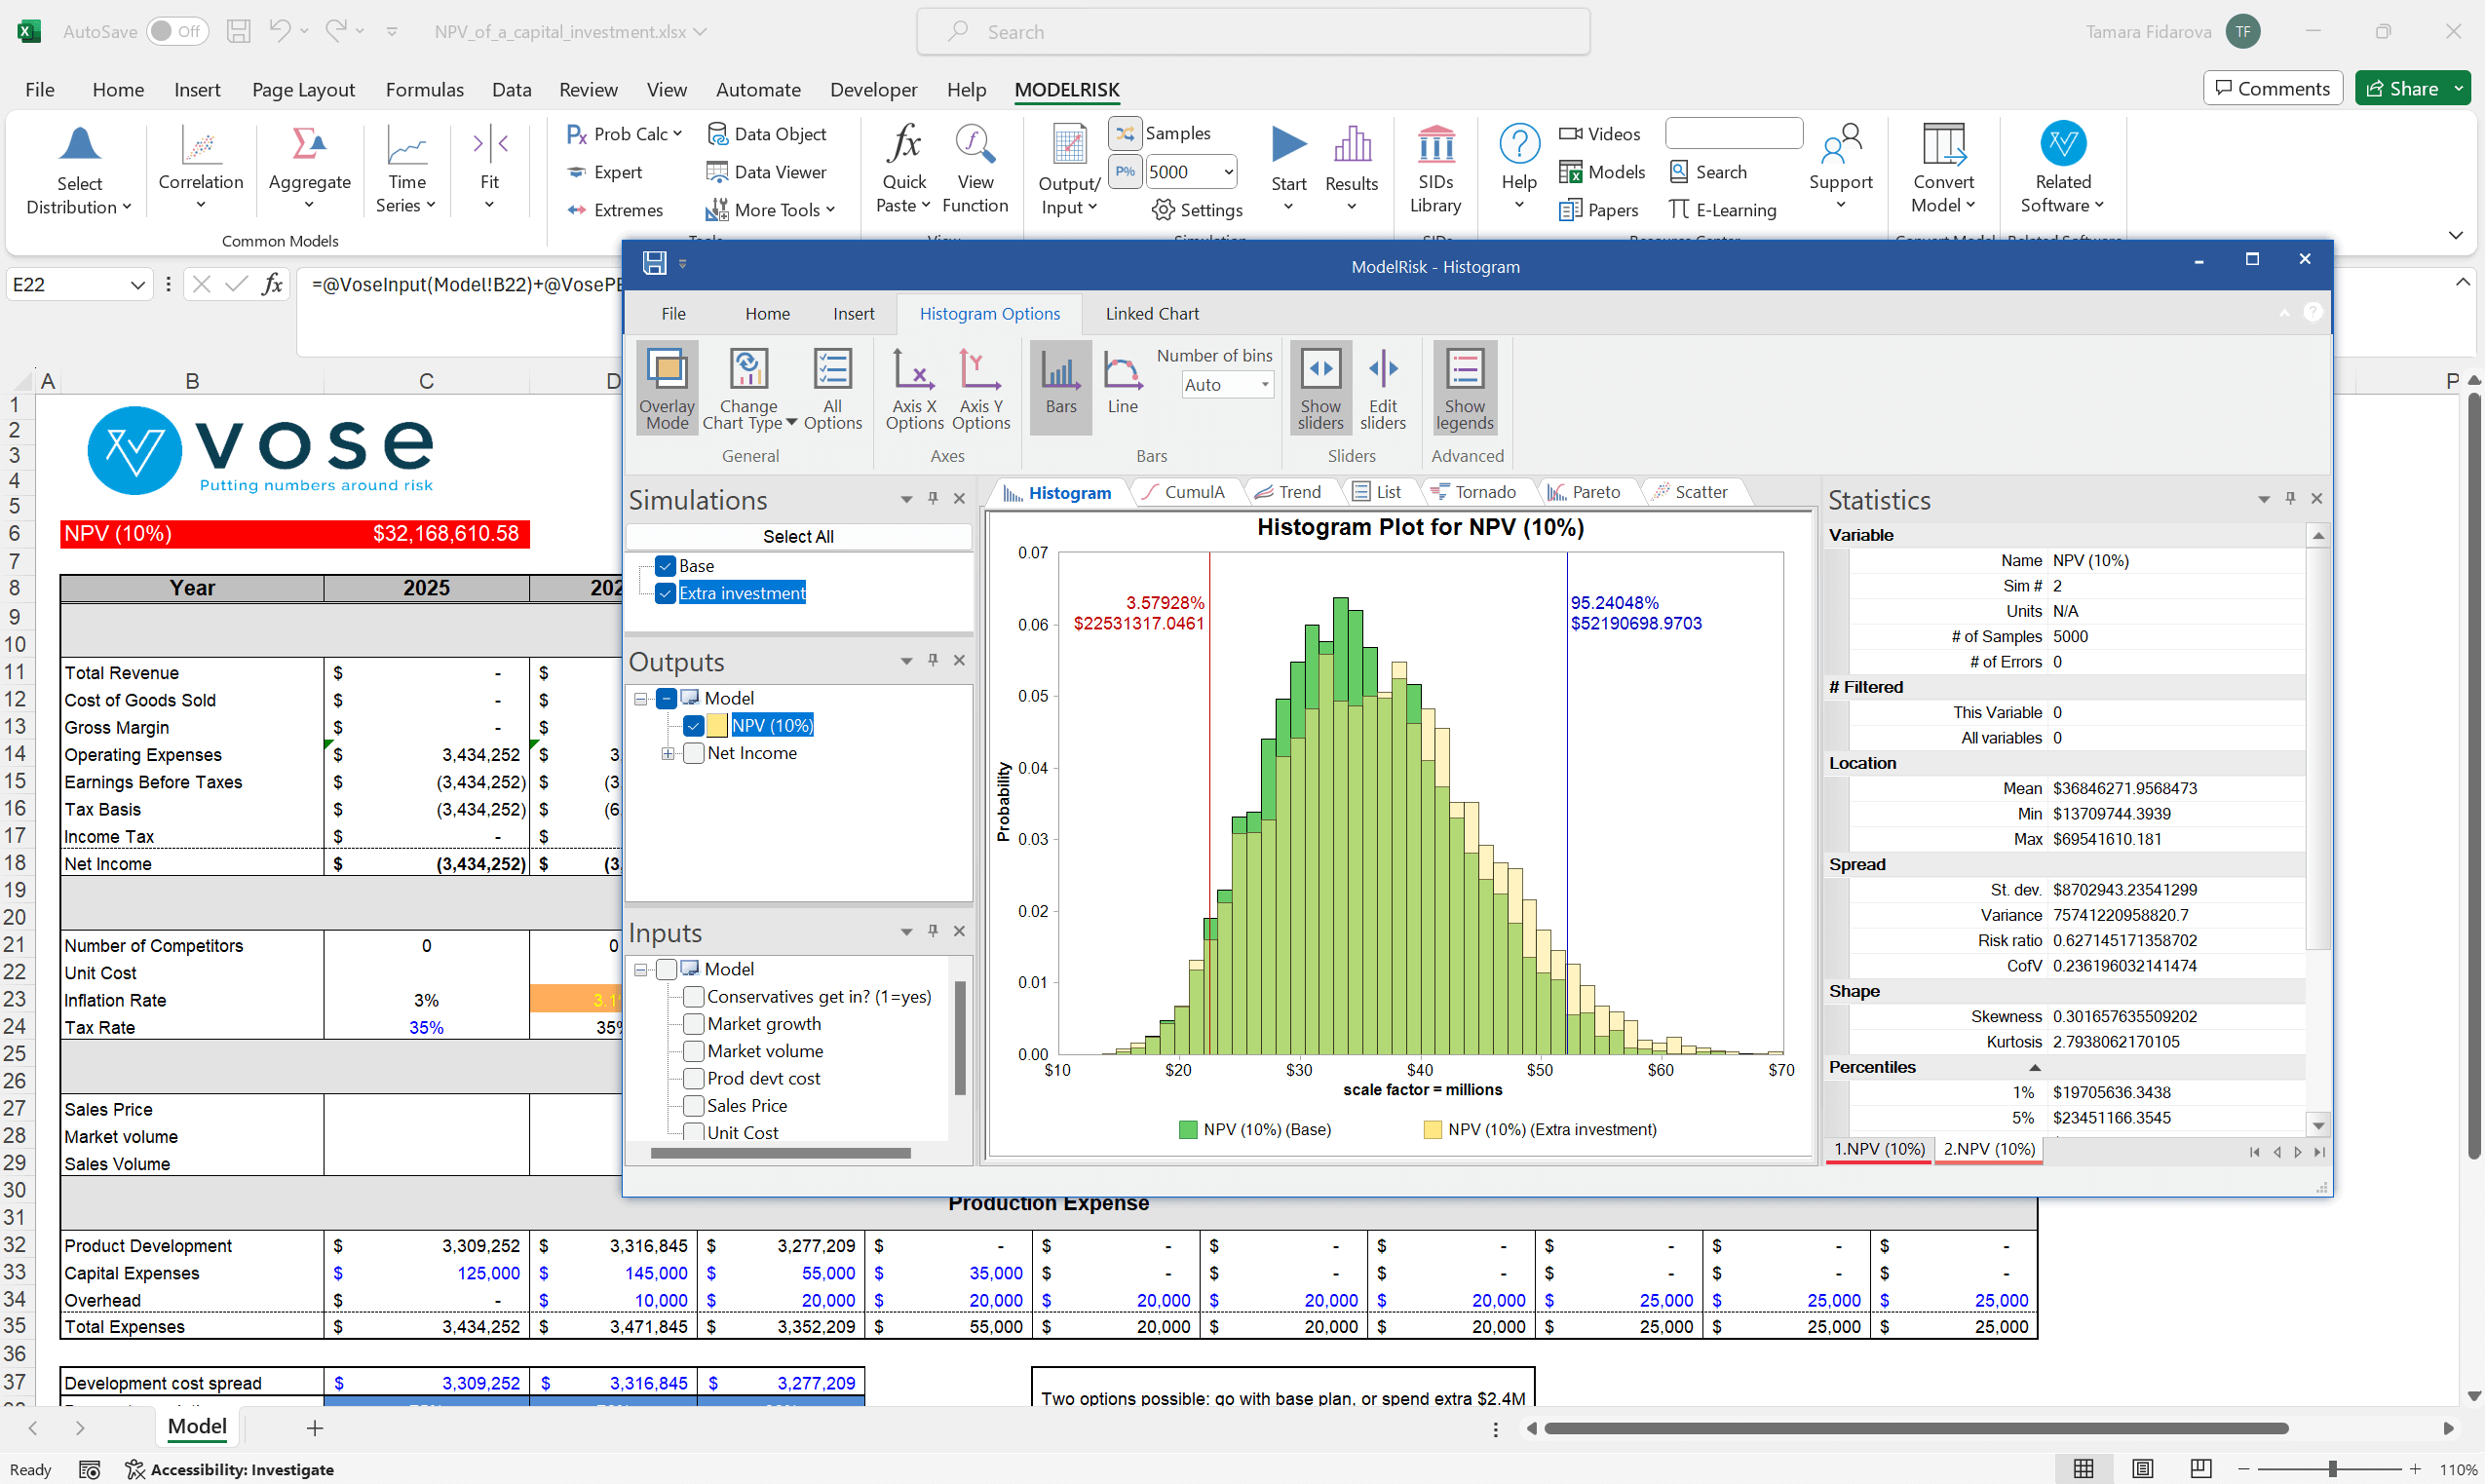 Simulation result charts and statistics output